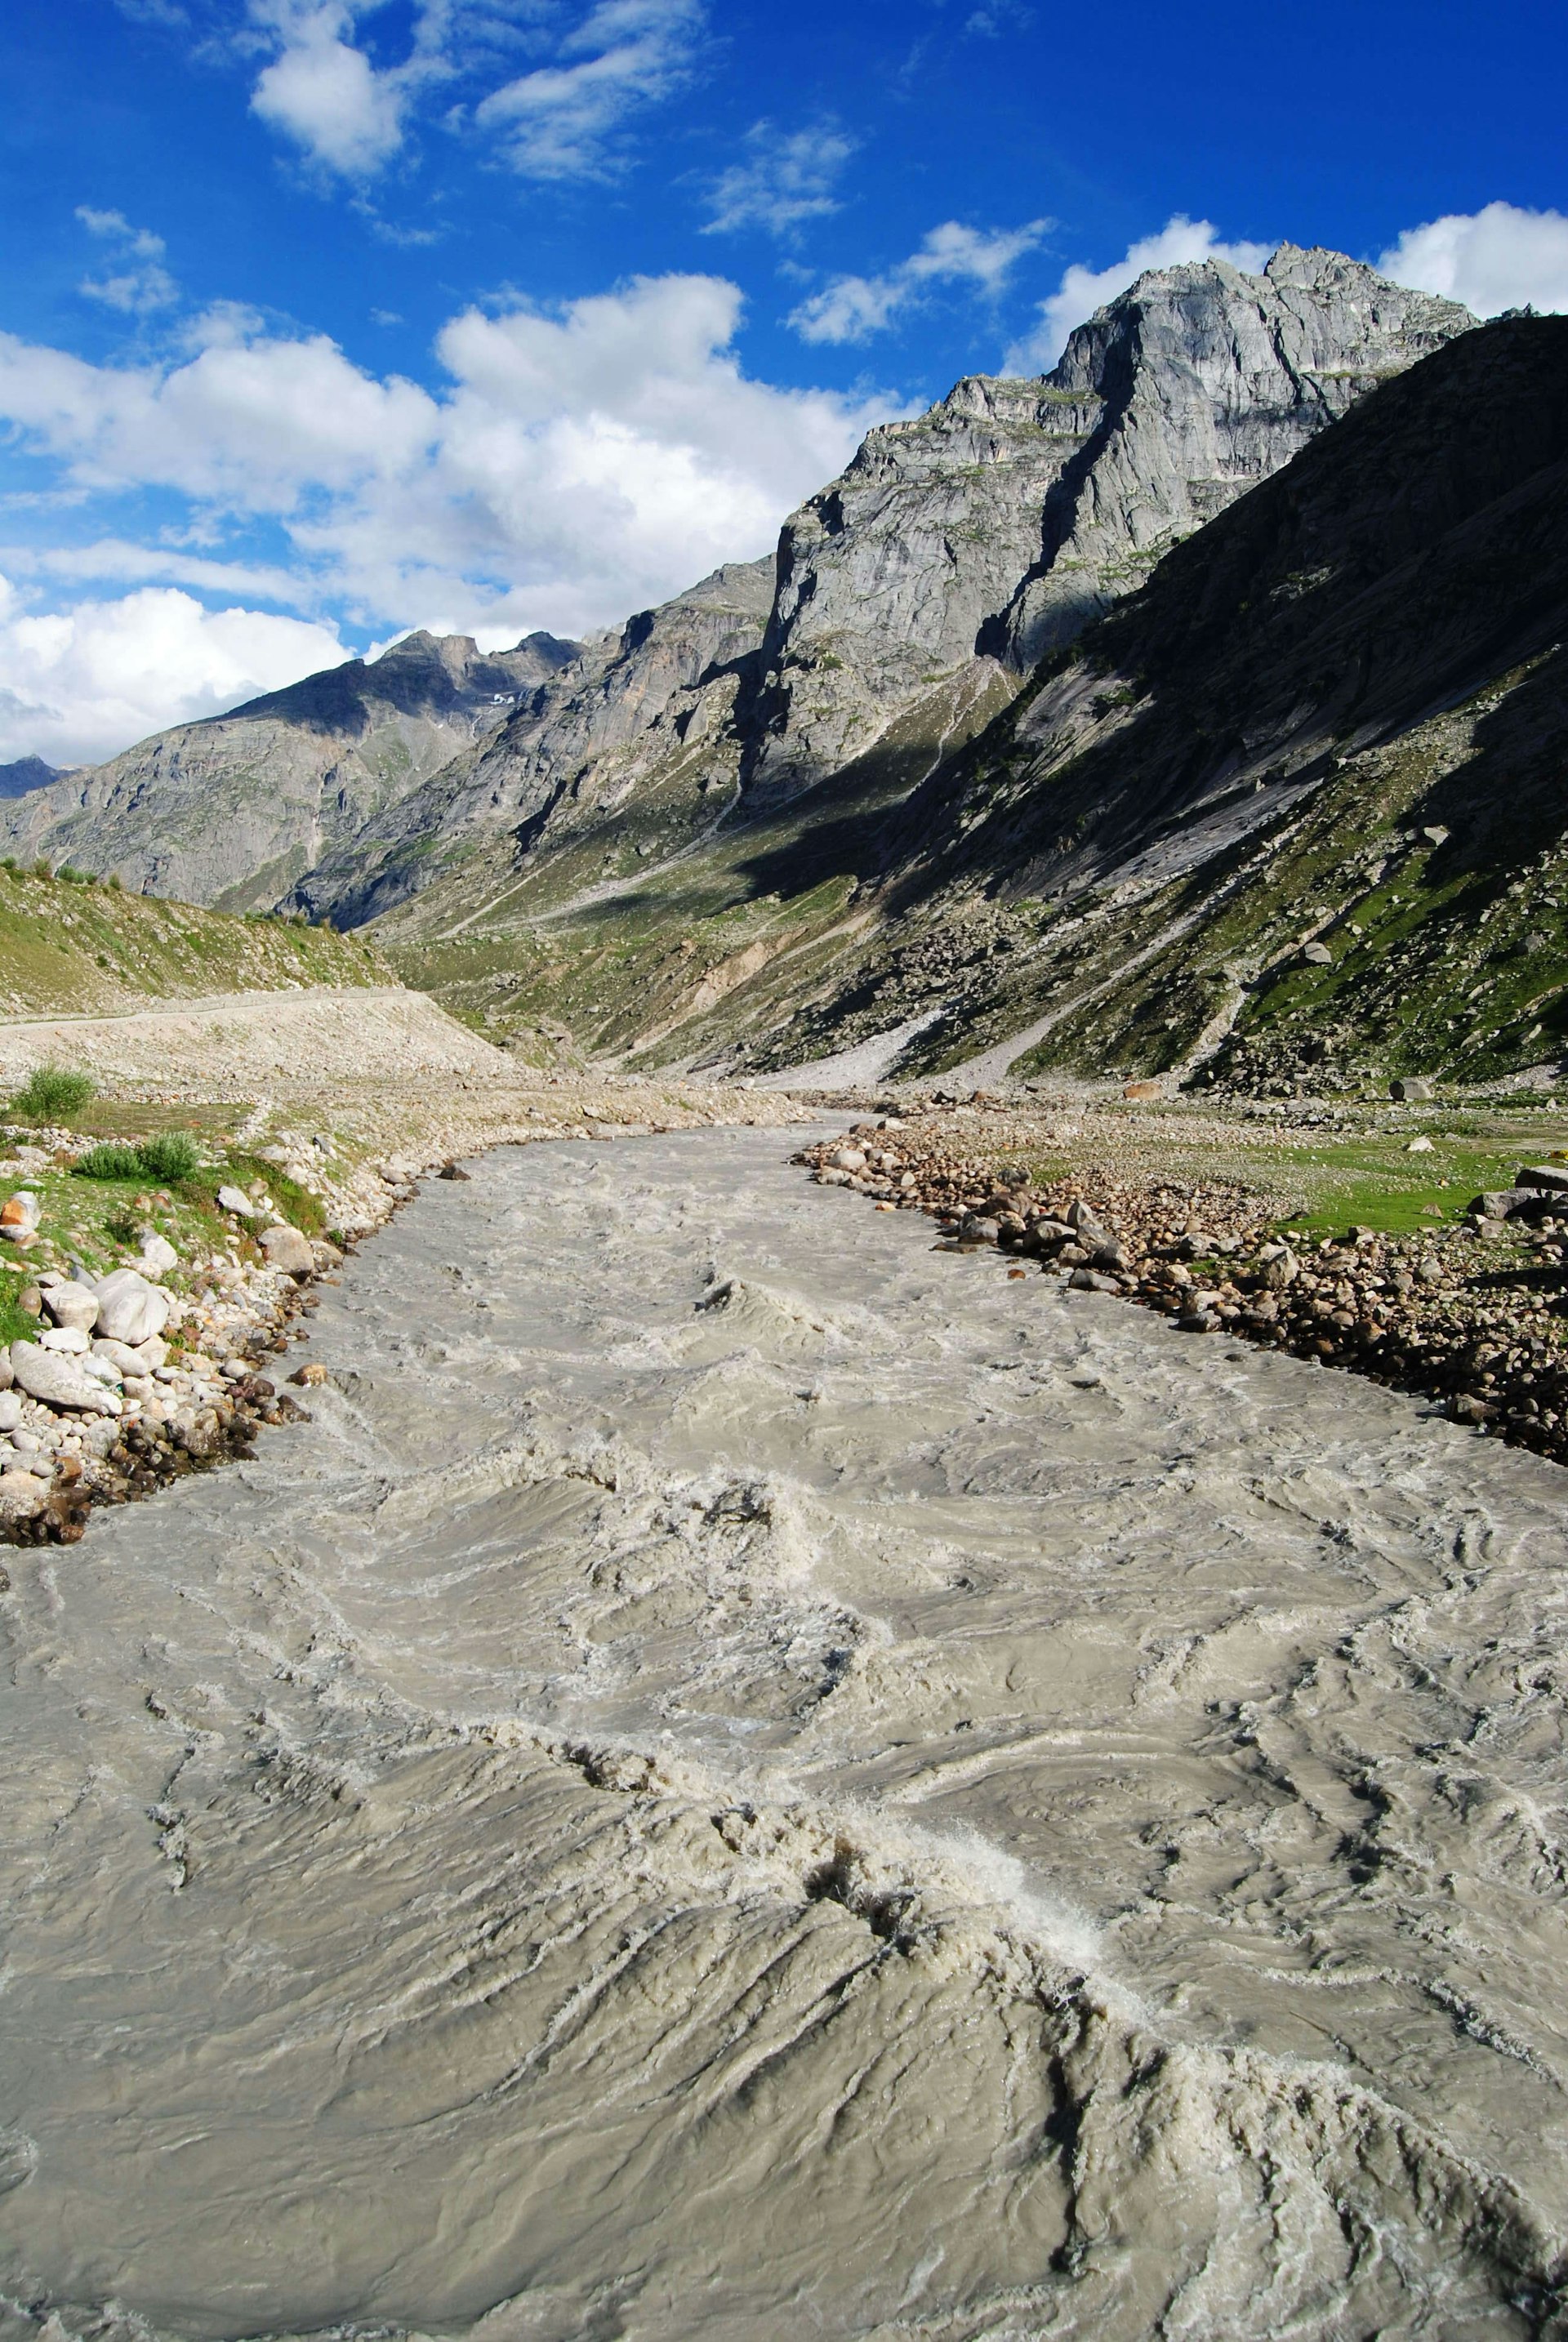 The Chandra River surging through a mountain valley in Lahaul